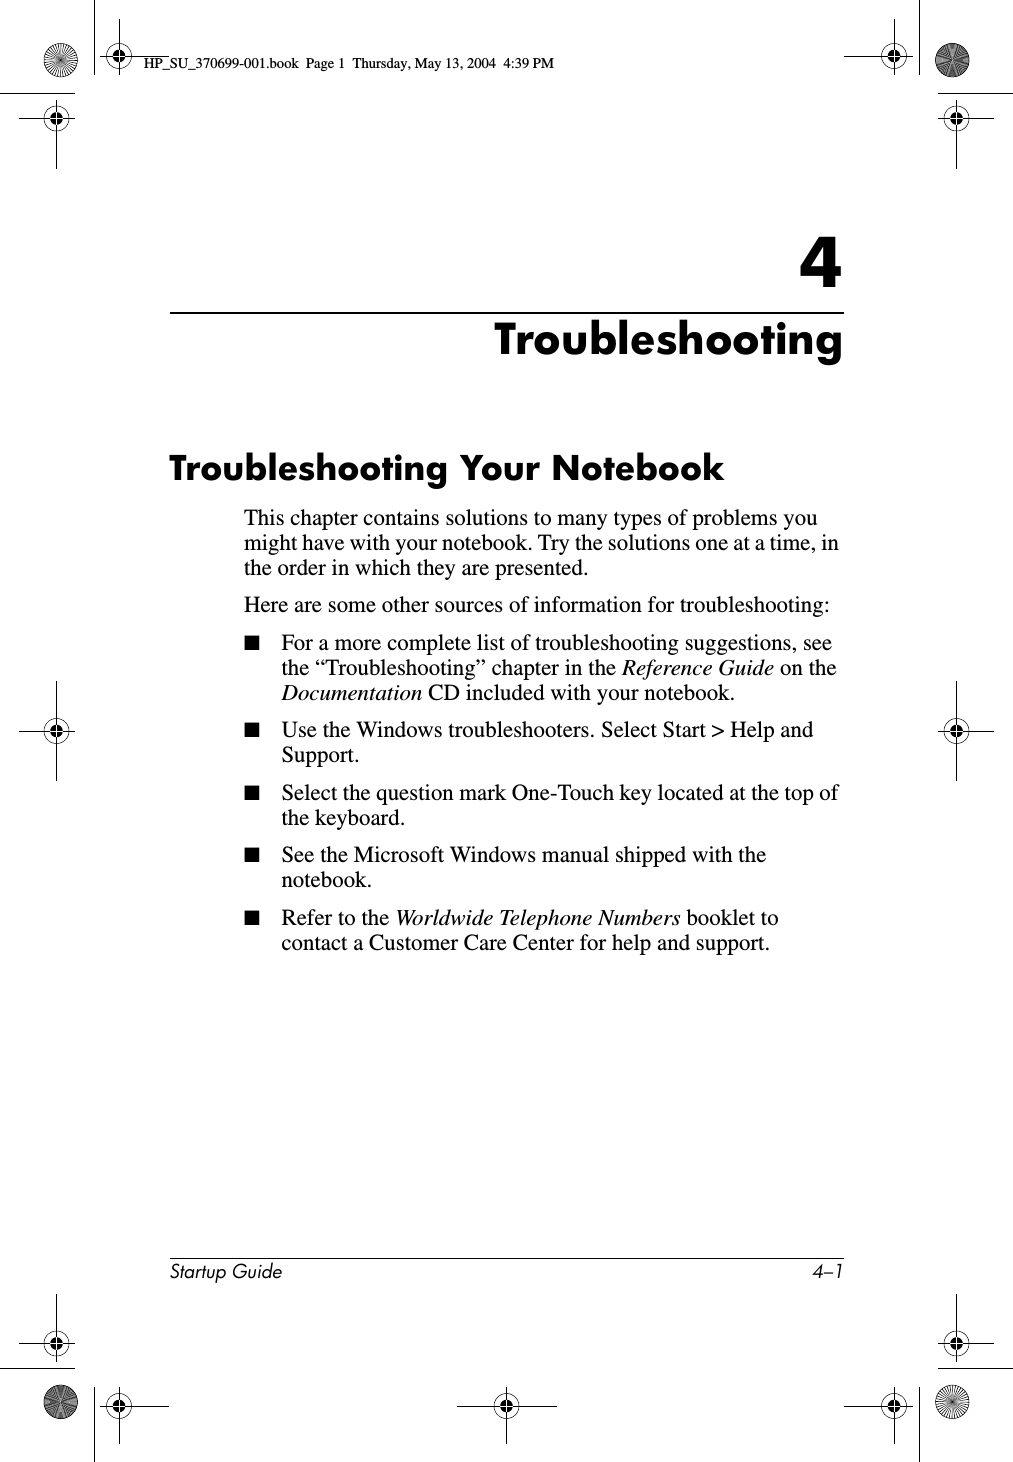 Startup Guide 4–14TroubleshootingTroubleshooting Your NotebookThis chapter contains solutions to many types of problems you might have with your notebook. Try the solutions one at a time, in the order in which they are presented.Here are some other sources of information for troubleshooting:■For a more complete list of troubleshooting suggestions, see the “Troubleshooting” chapter in the Reference Guide on the Documentation CD included with your notebook.■Use the Windows troubleshooters. Select Start &gt; Help and Support.■Select the question mark One-Touch key located at the top of the keyboard.■See the Microsoft Windows manual shipped with the notebook.■Refer to the Worldwide Telephone Numbers booklet to contact a Customer Care Center for help and support.HP_SU_370699-001.book  Page 1  Thursday, May 13, 2004  4:39 PM